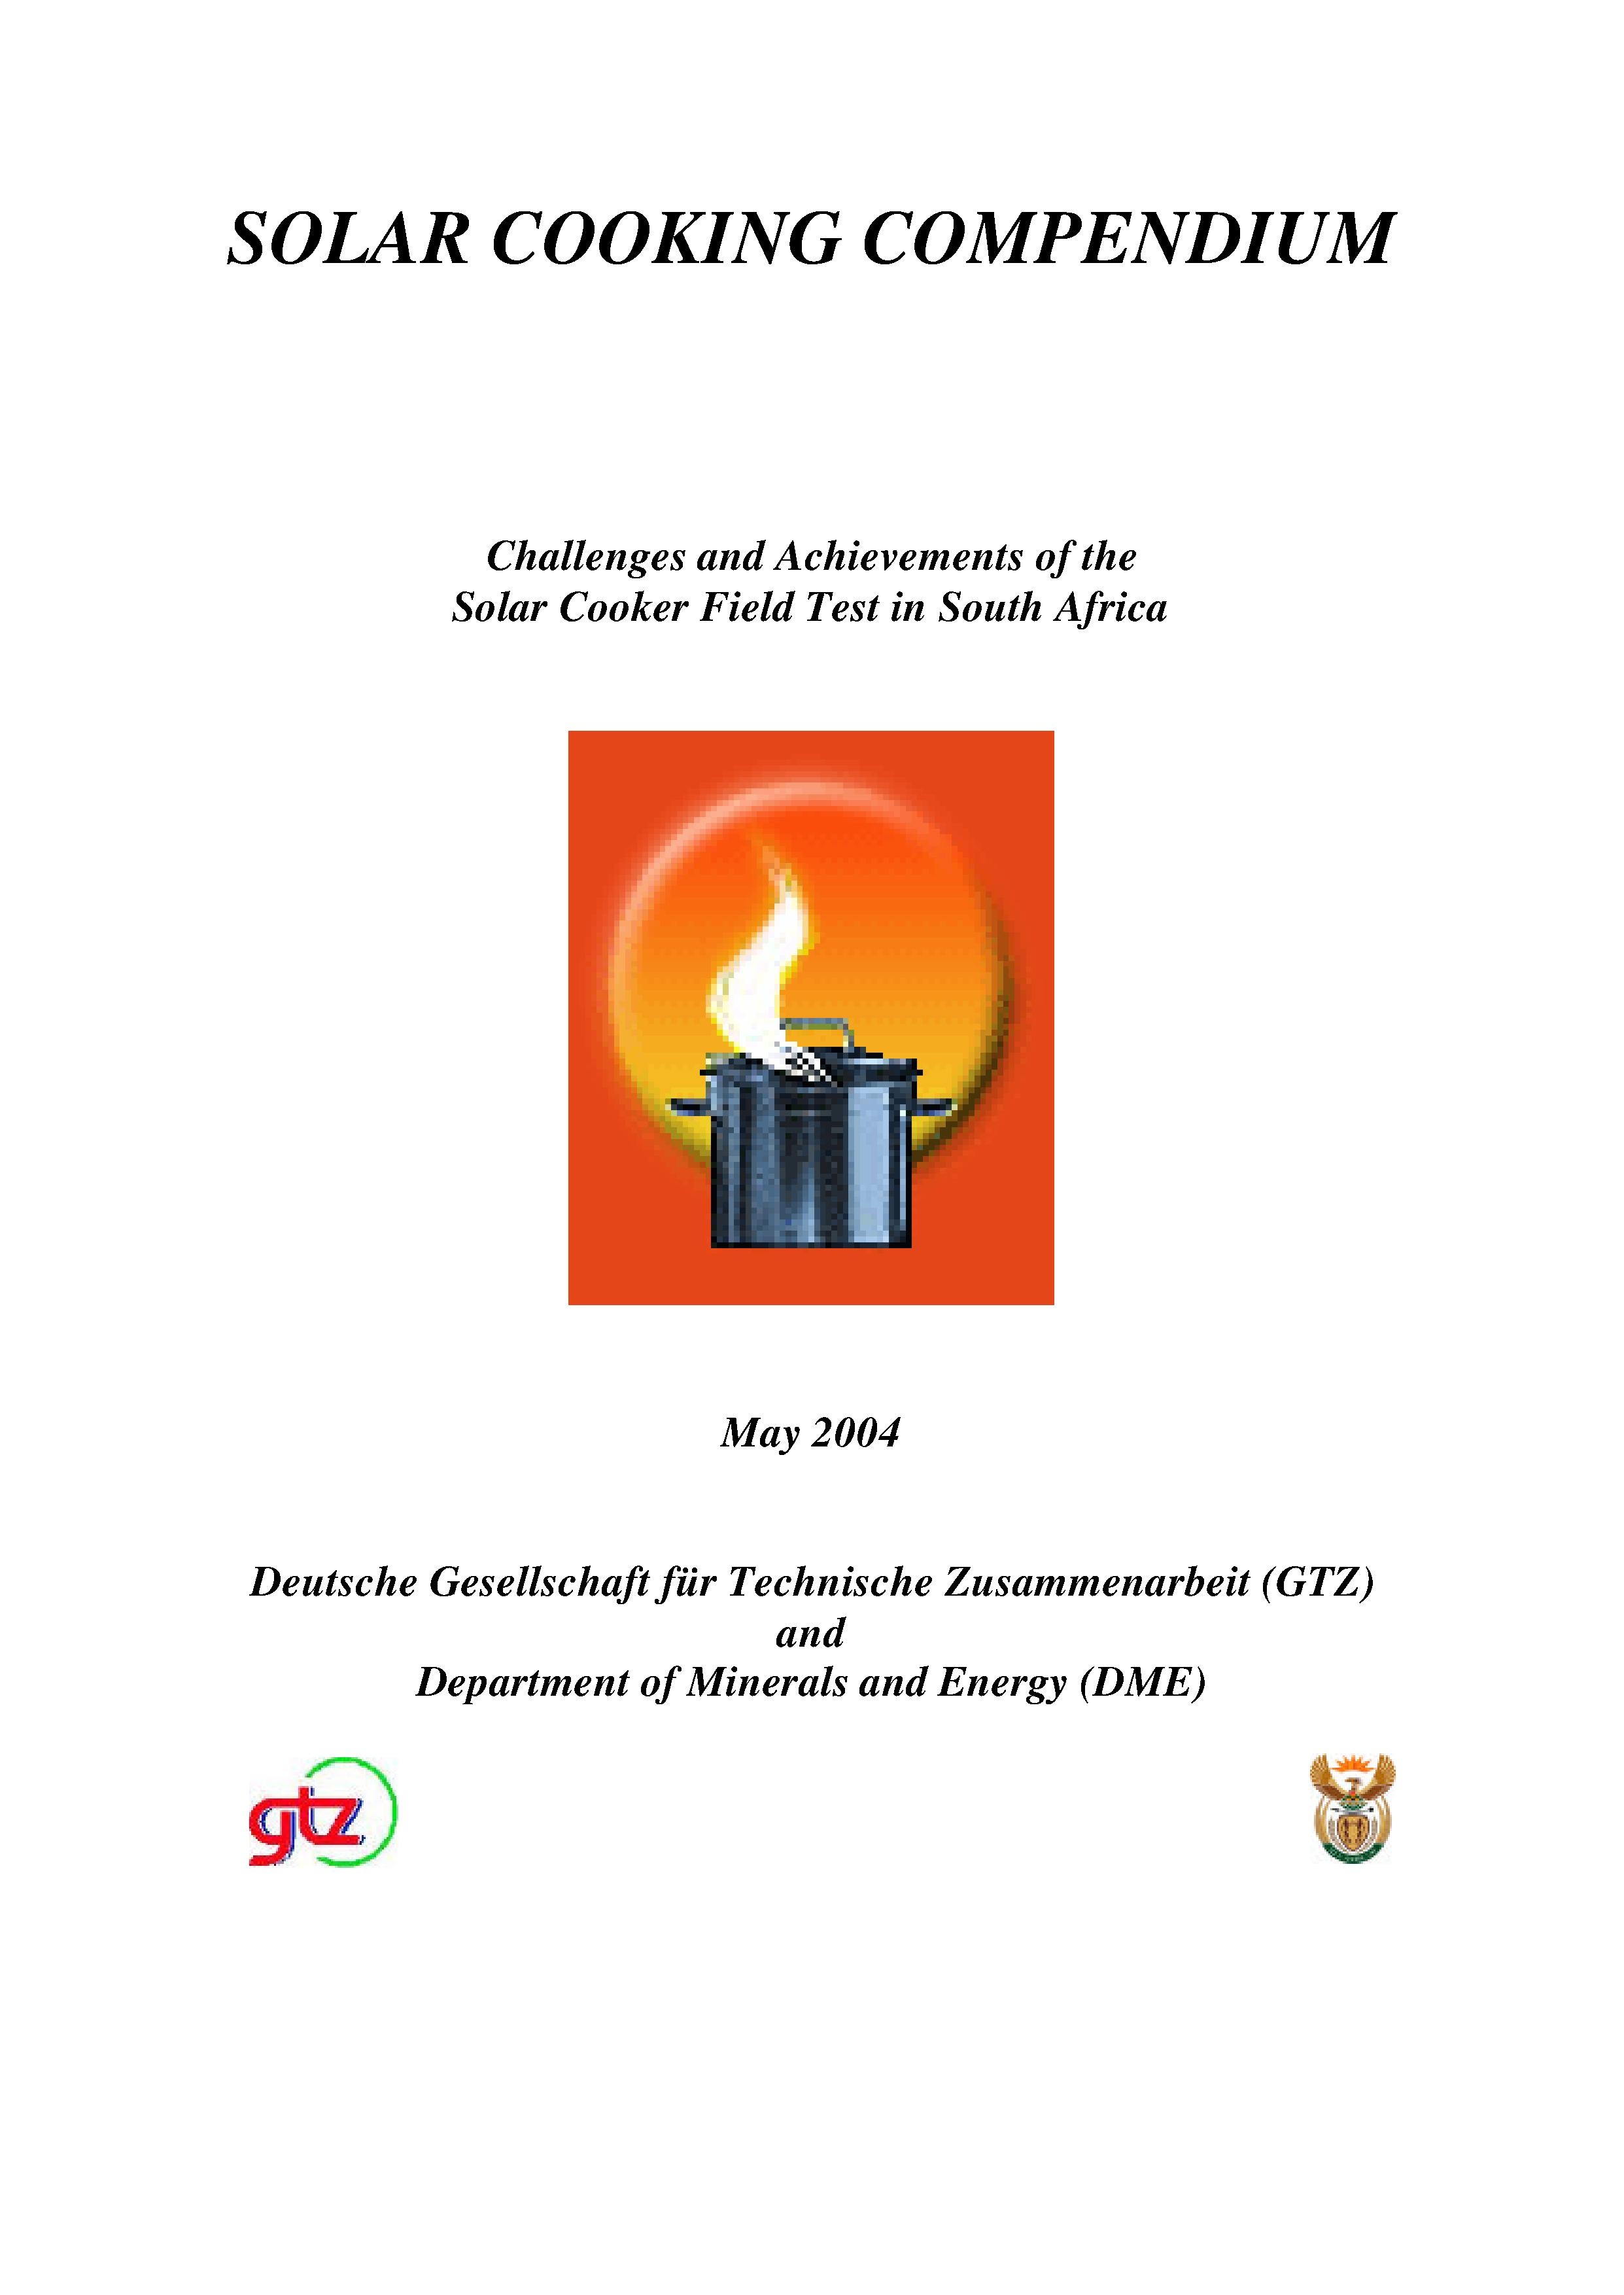 Solar Cooking Compendium Main Report: Challenges and achievements of the Solar Cooker Field Test in South Africa